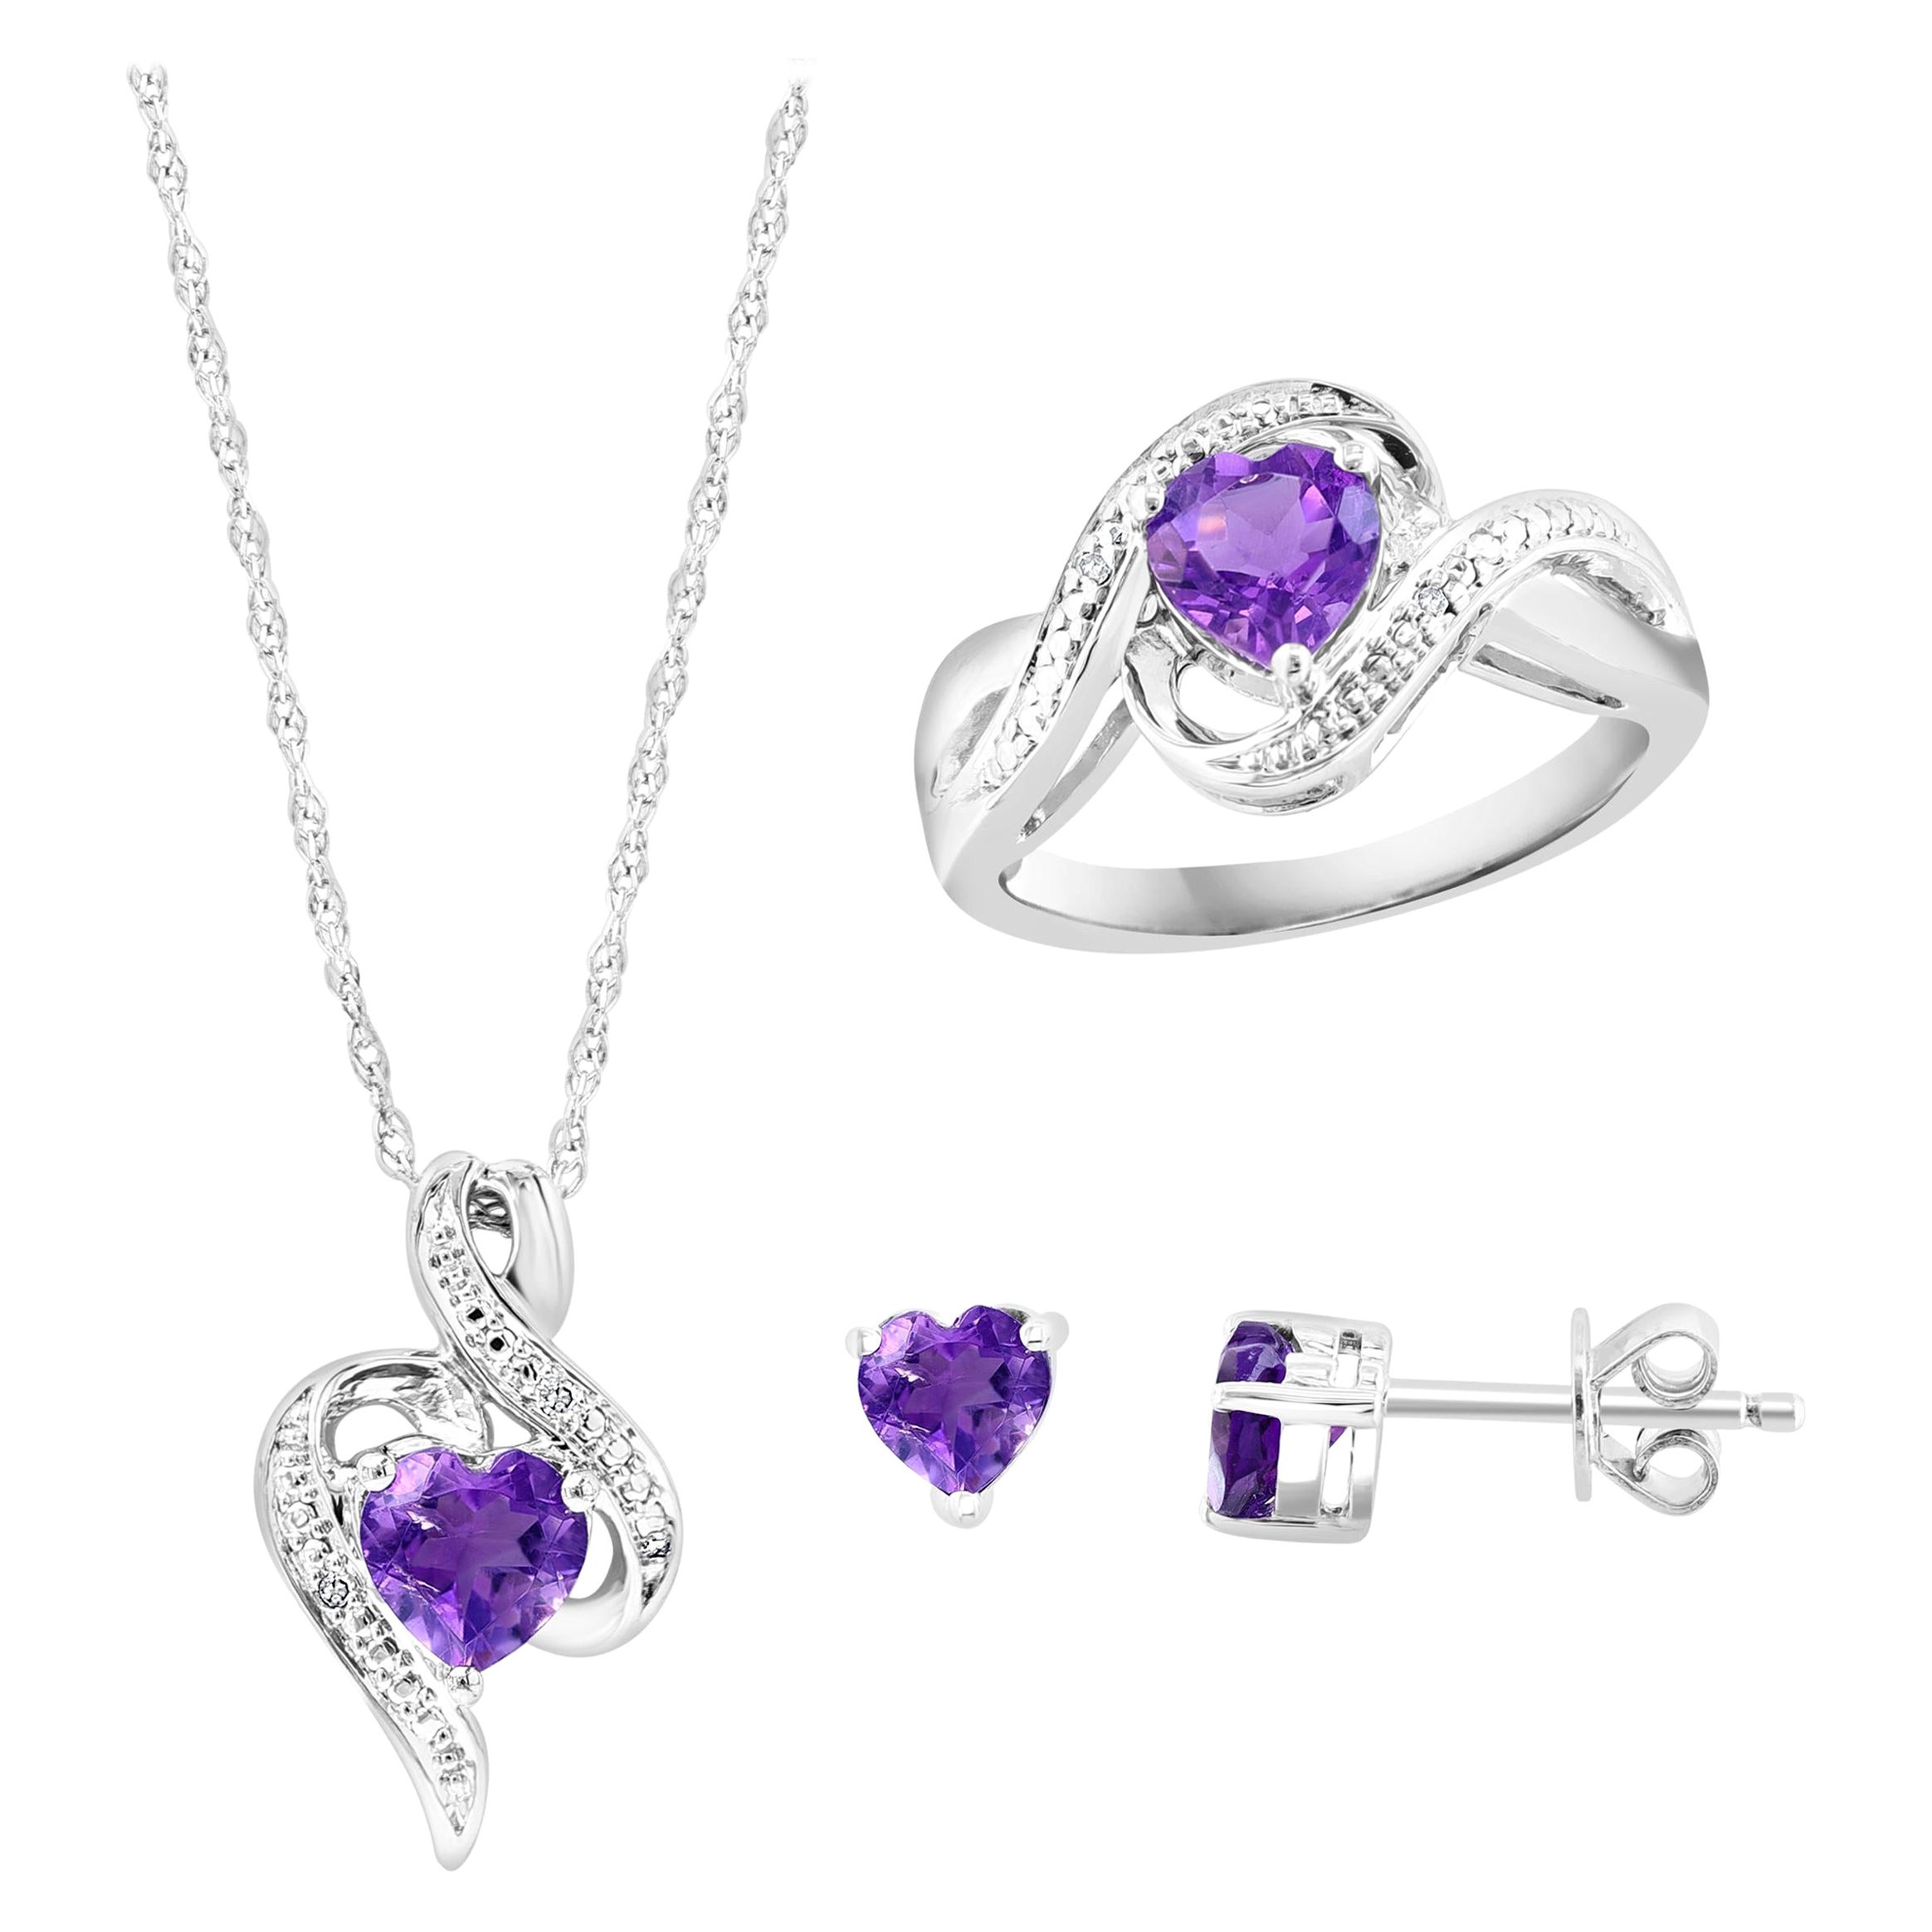 Sterling Silver & Natural Amethyst Suite Ring , Earring & Pendant with Chain For Sale